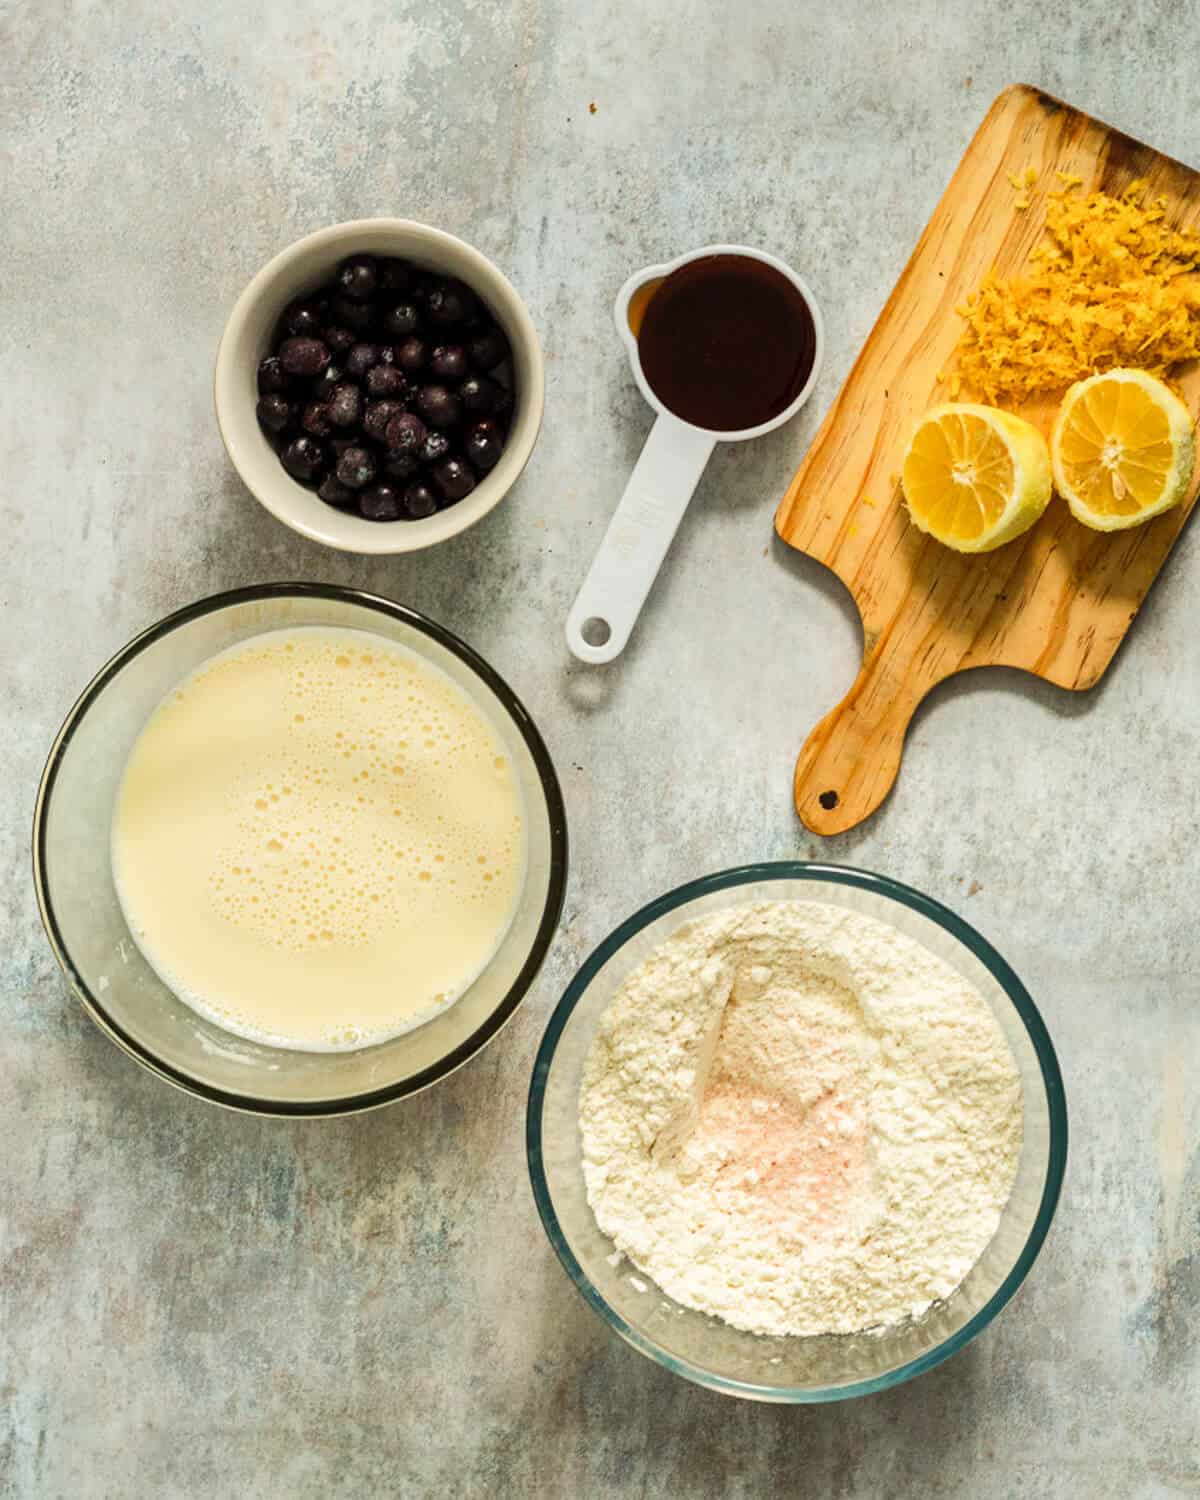 The ingredients needed to make gluten-free baked pancakes.